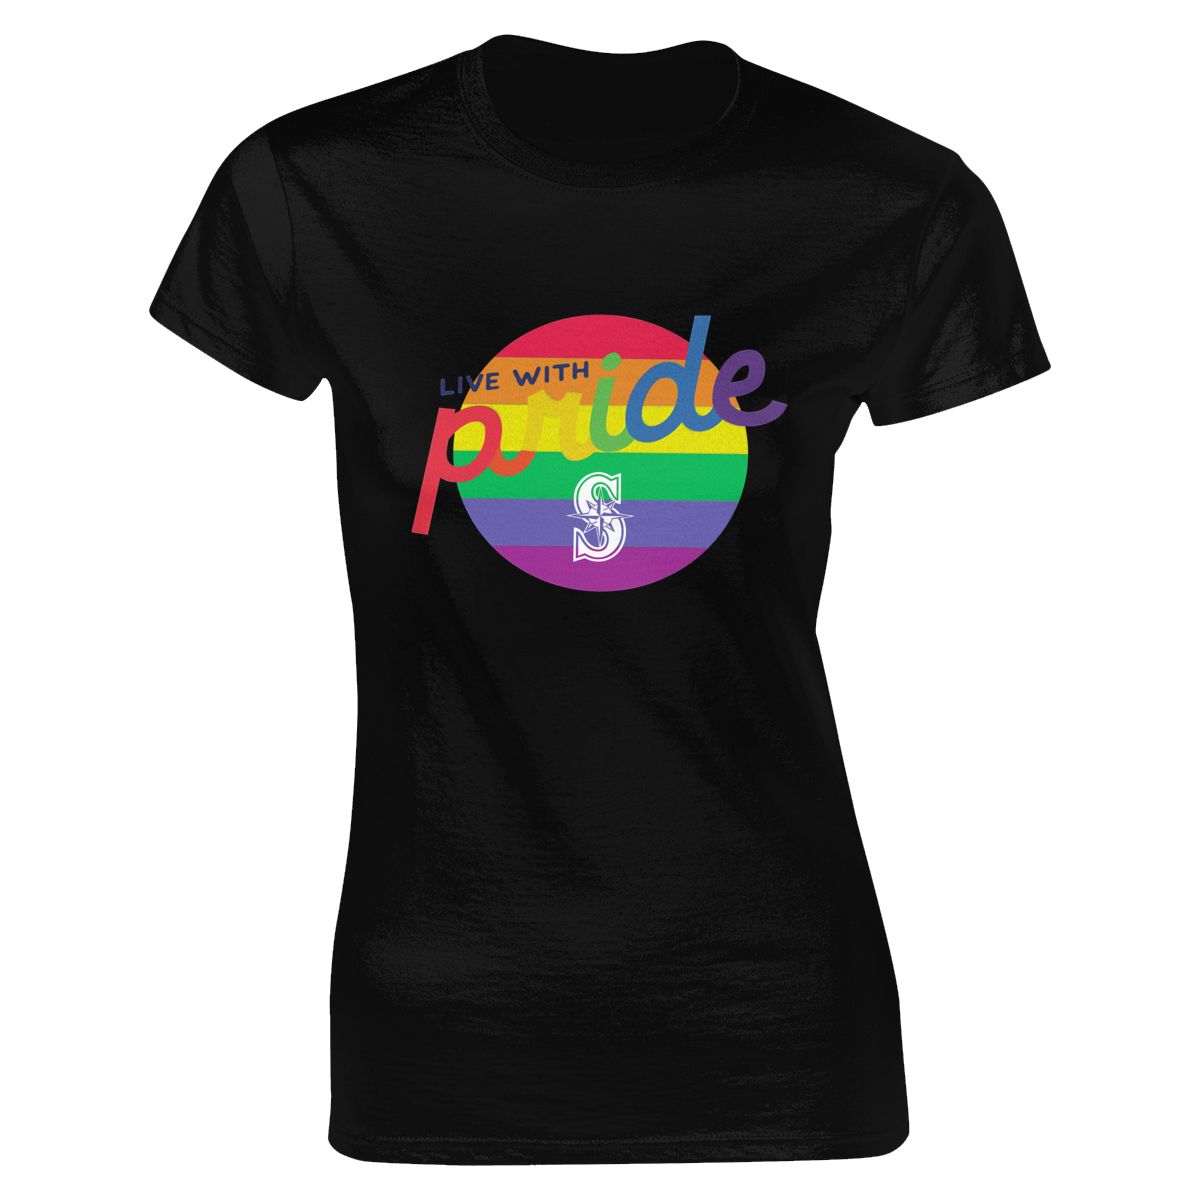 Seattle Mariners Round LGBT Lettering Women's Crewneck T-Shirt